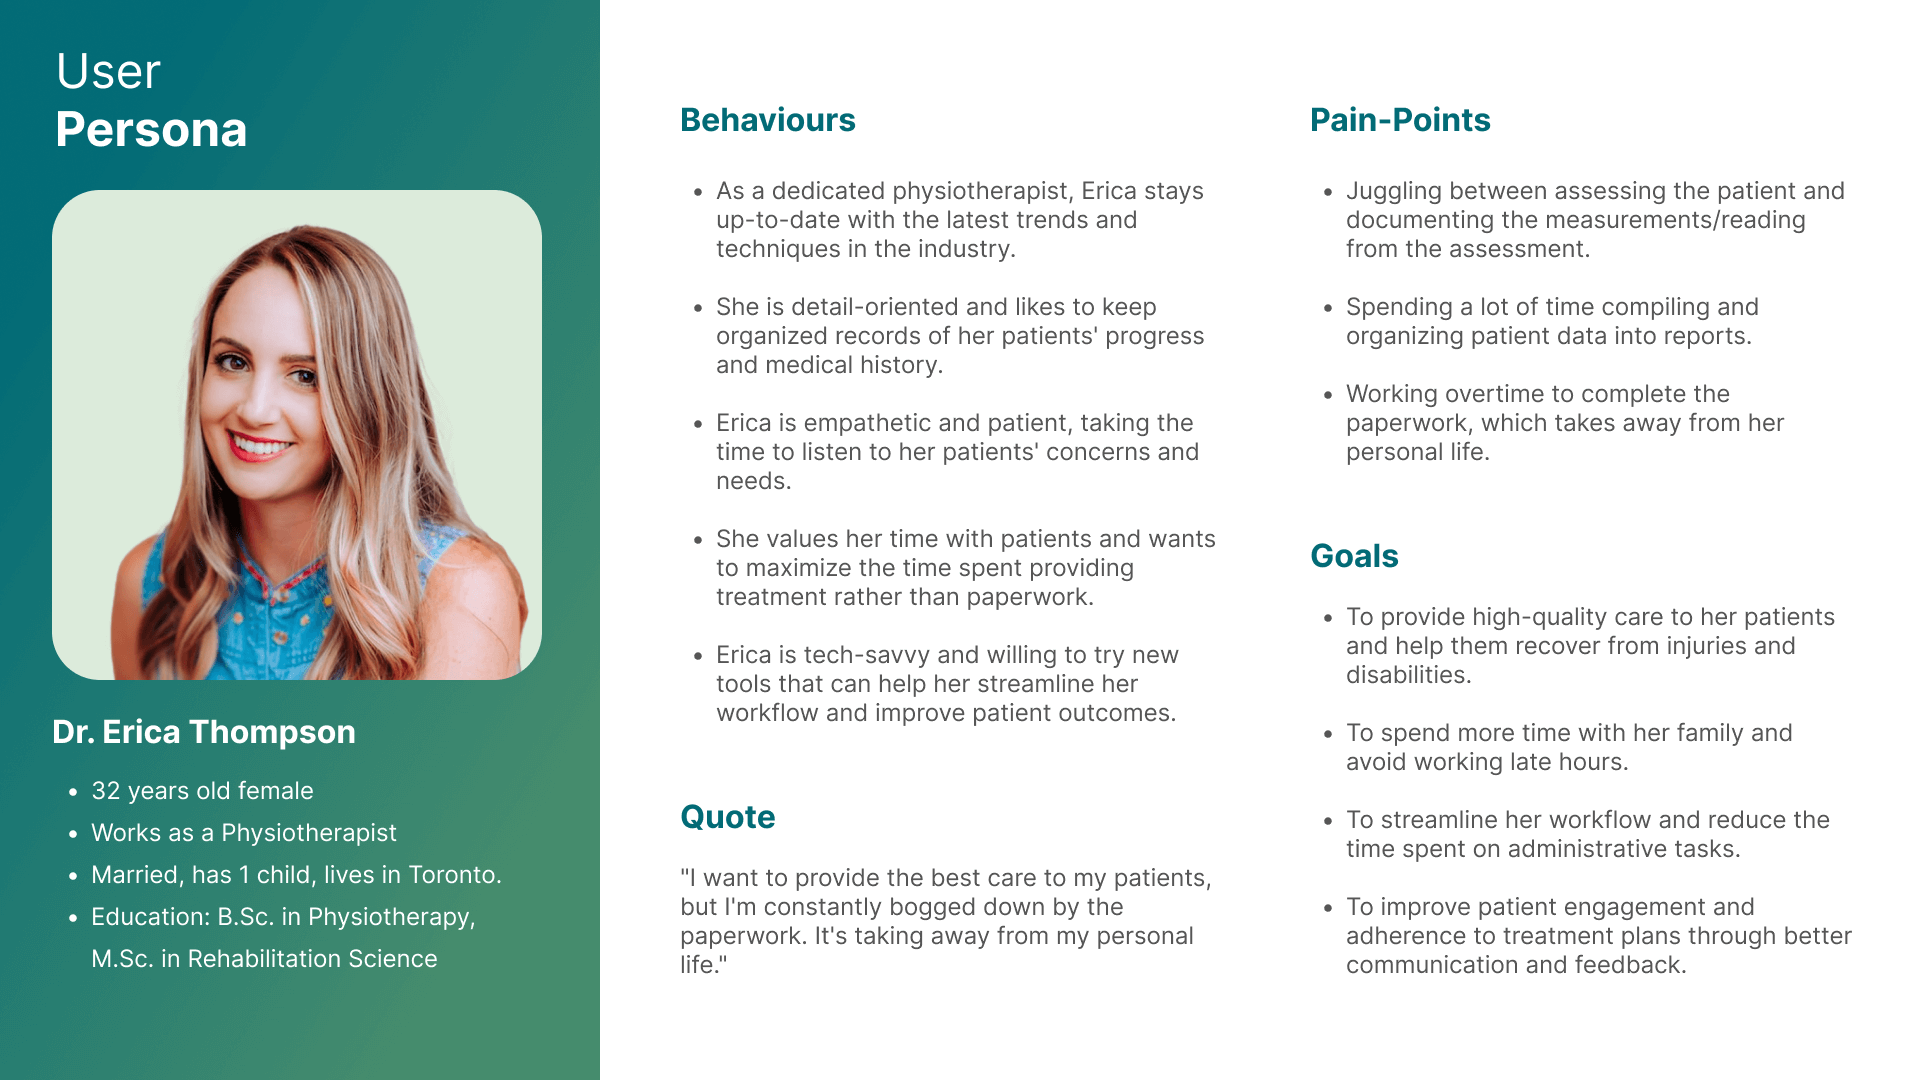 User persona of Dr. Erica, a physiotherapist.